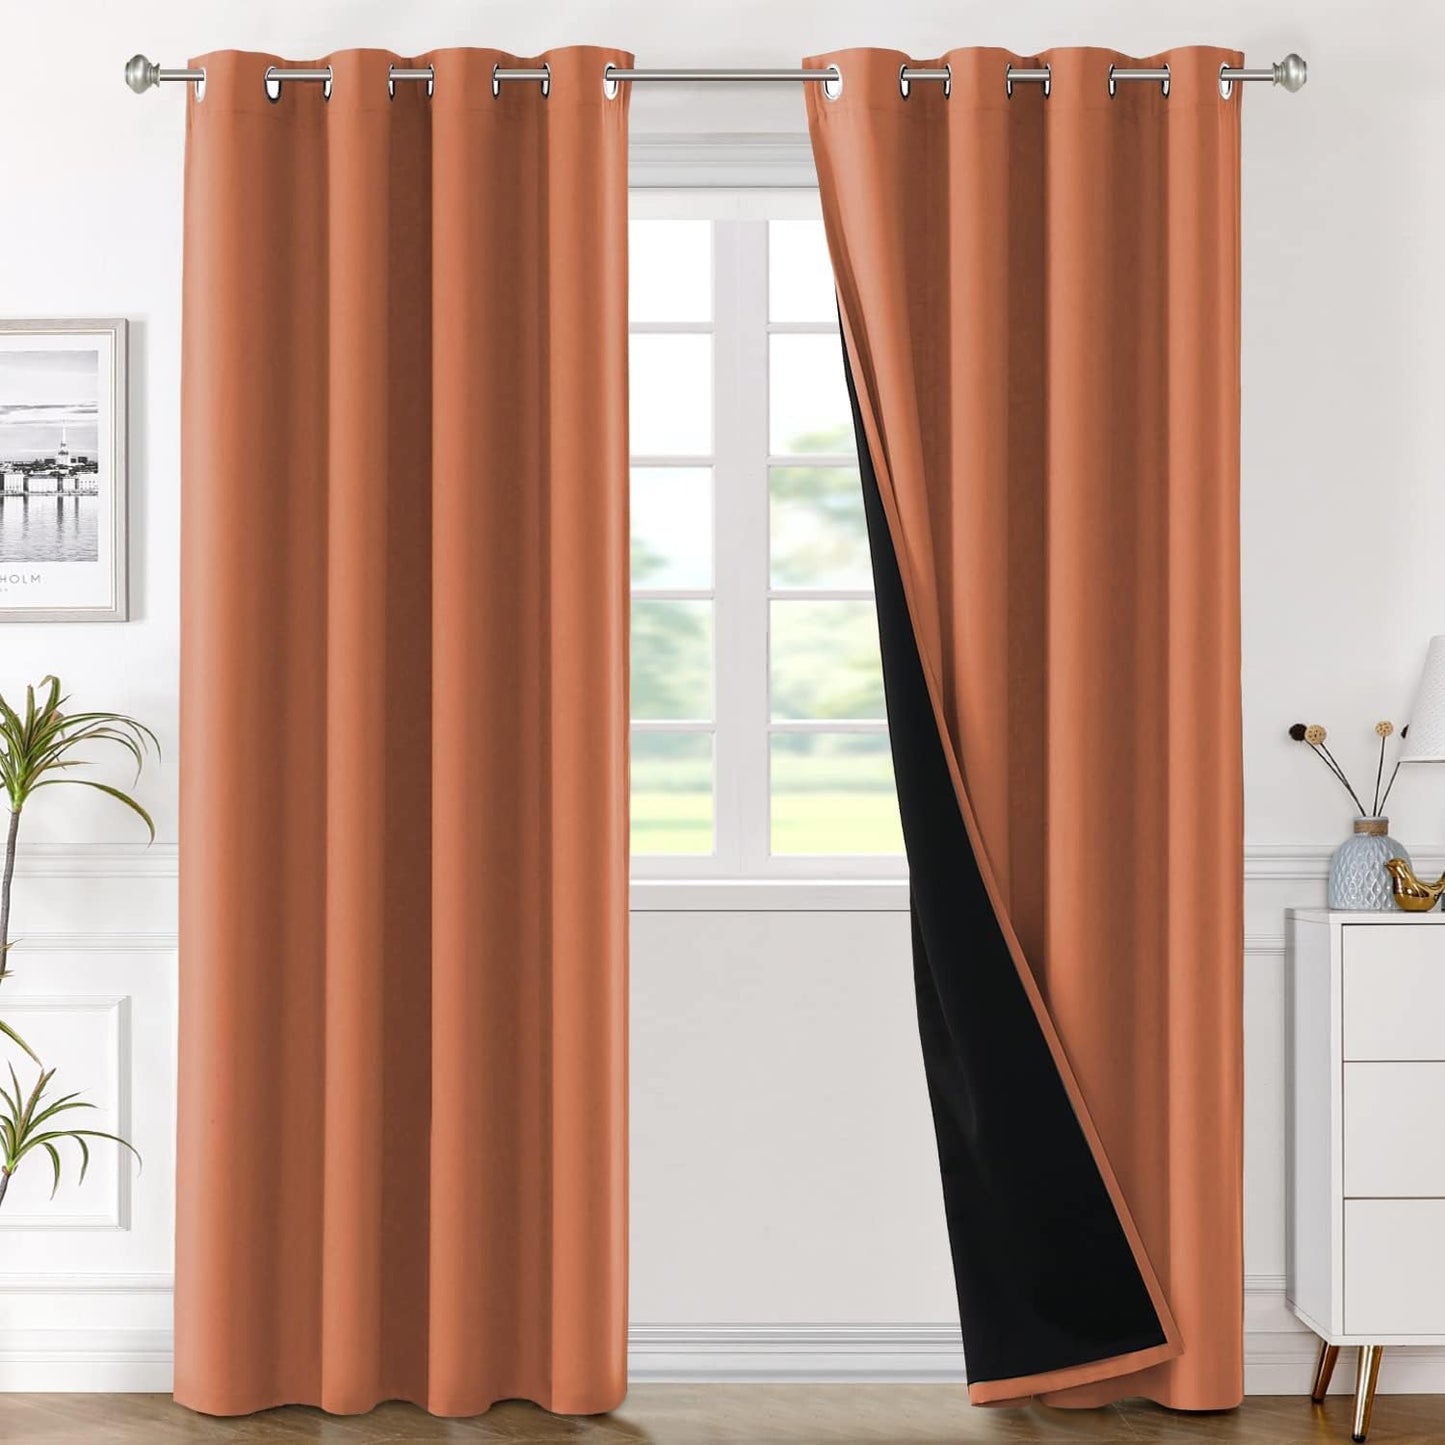 H.VERSAILTEX Blackout Curtains with Liner Backing, Thermal Insulated Curtains for Living Room, Noise Reducing Drapes, White, 52 Inches Wide X 96 Inches Long per Panel, Set of 2 Panels  H.VERSAILTEX Burnt Orange 52"W X 96"L 